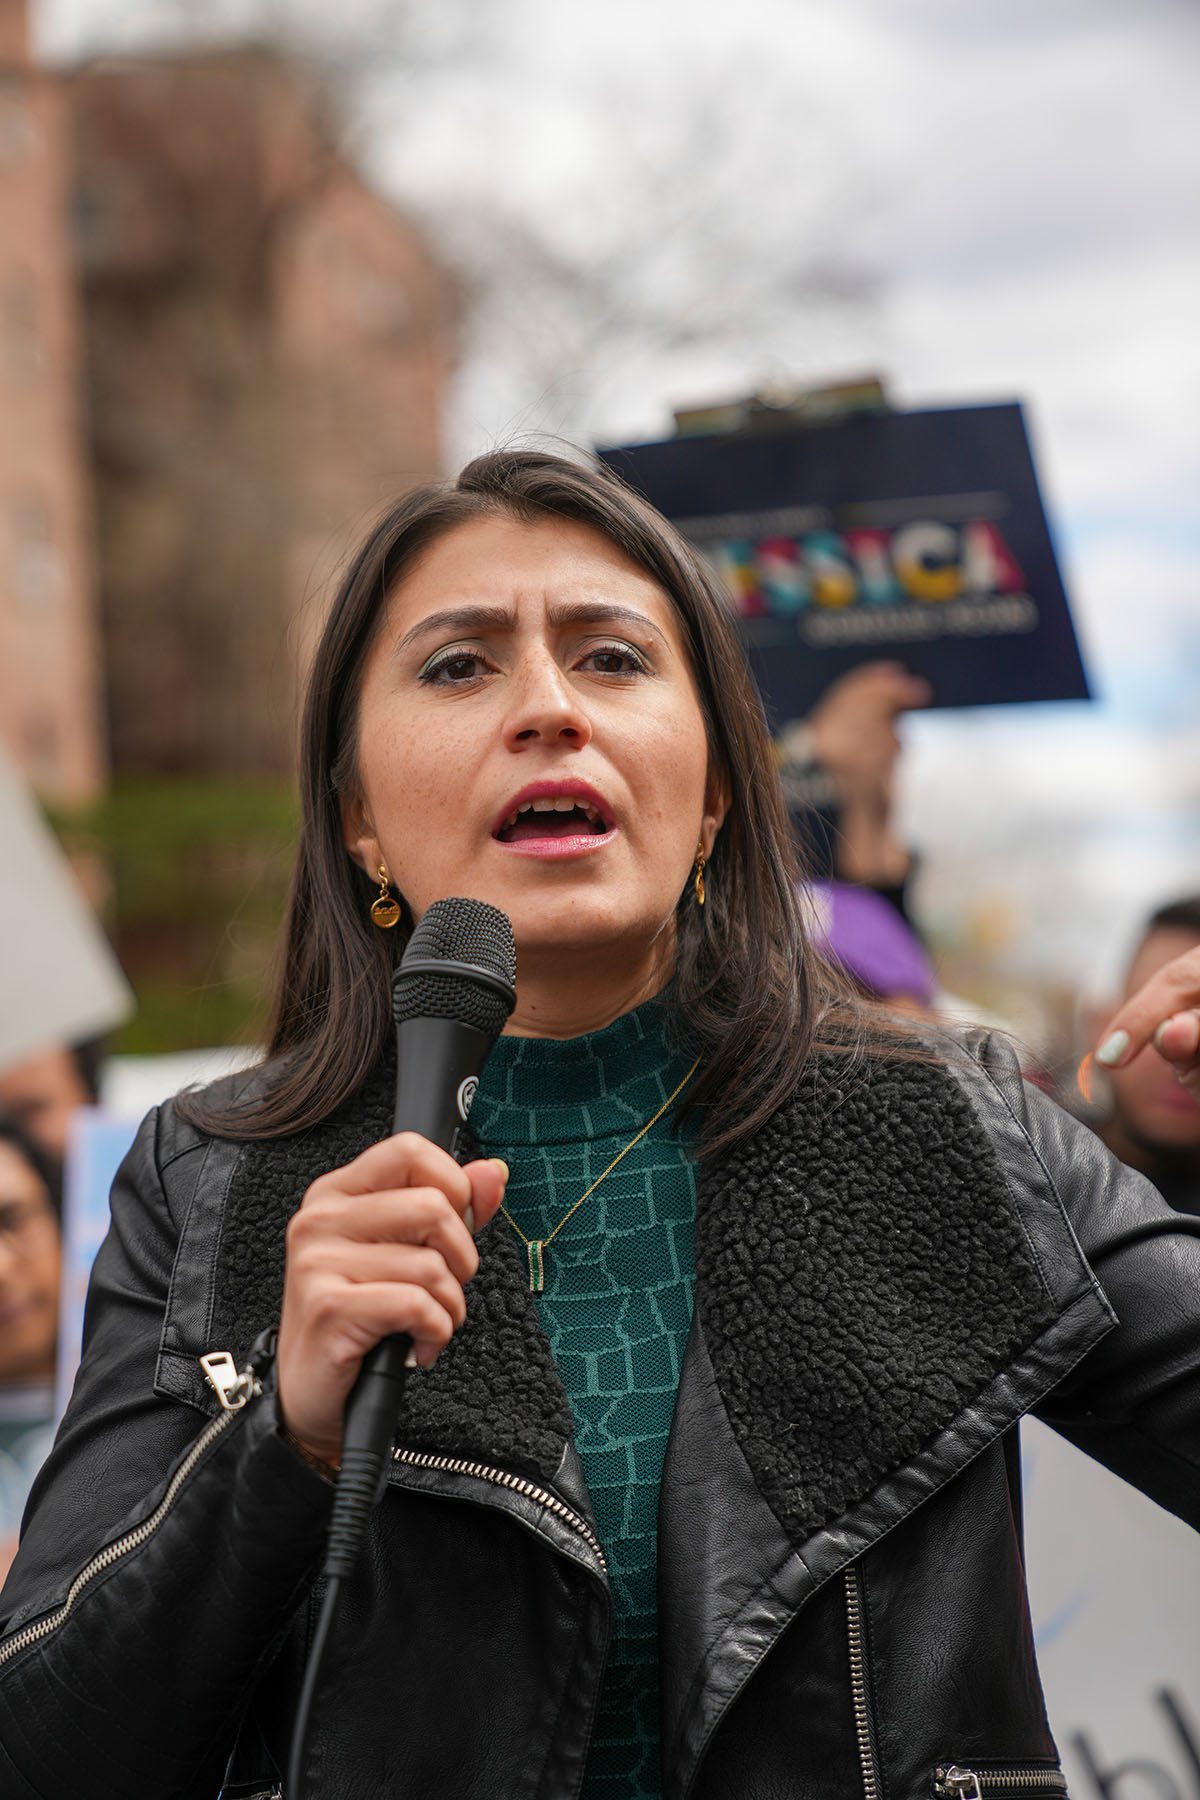 New York State Sen. Jessica Ramos holds a microphone at a campaign event